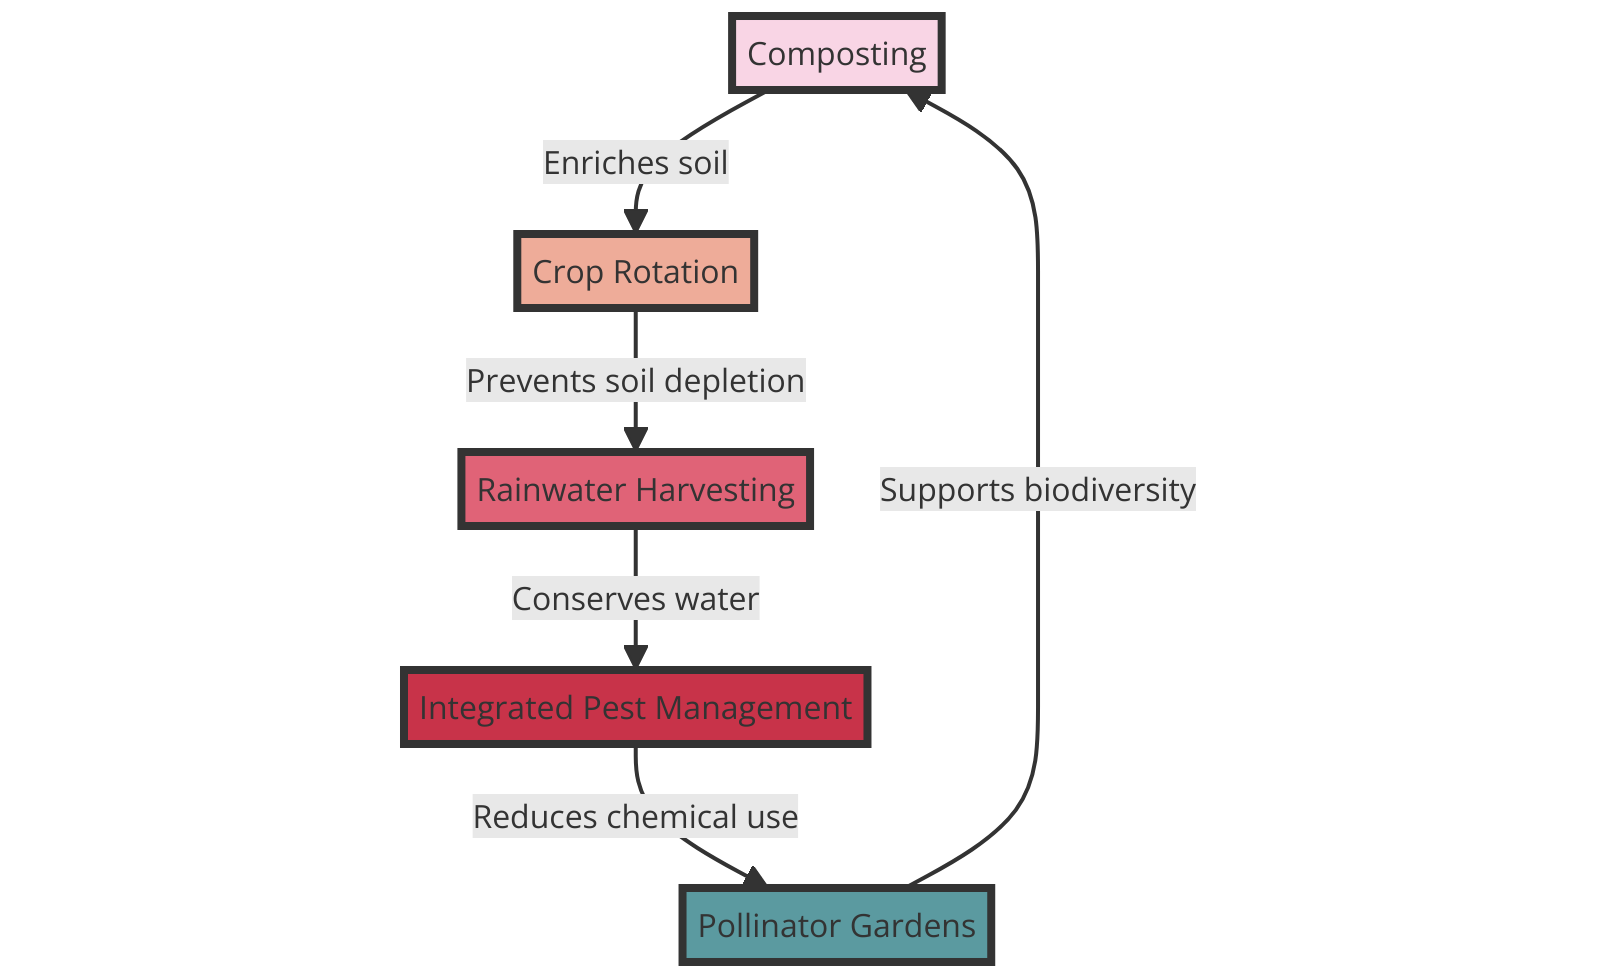 a cycle of sustainable garden practices in a vertical format, emphasizing ecological gardening techniques like composting, rainwater harvesting, and crop rotation